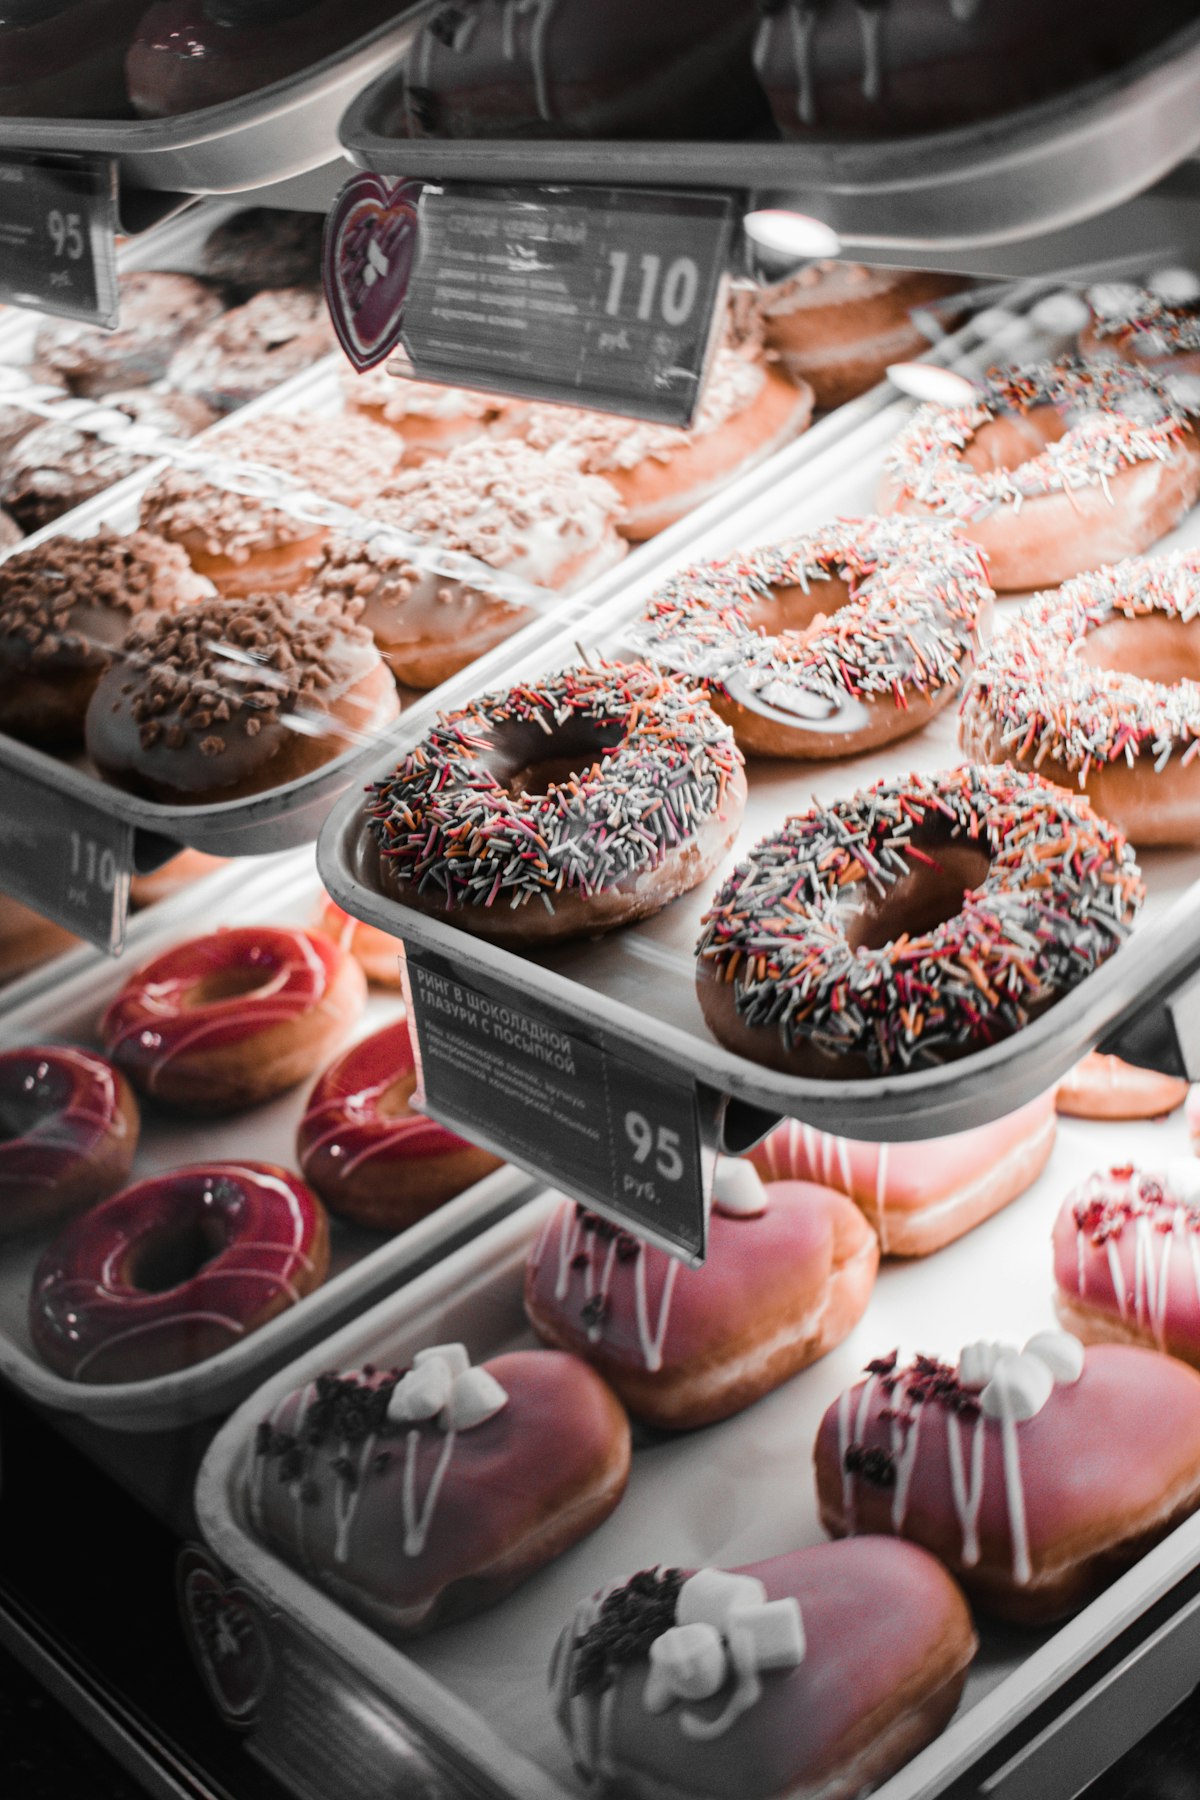 Donut Shop Business Plan Pdf Explained: What You Need to Know